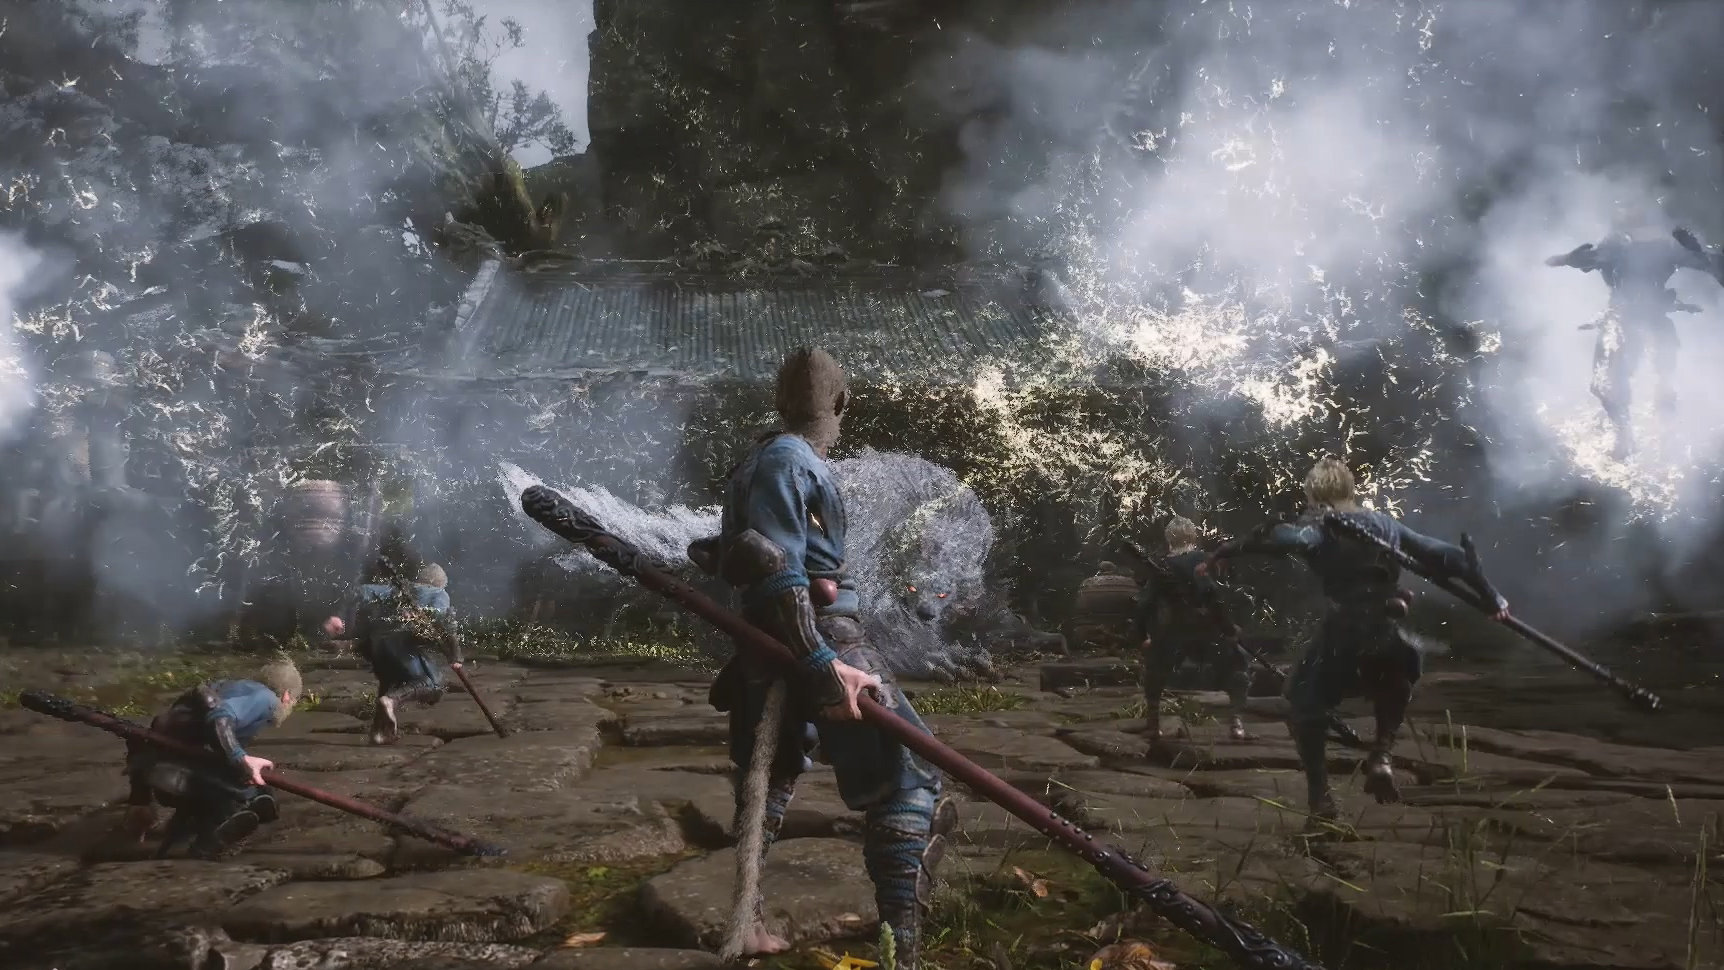 Black Myth: Wukong Gameplay Trailer Looks Awesome